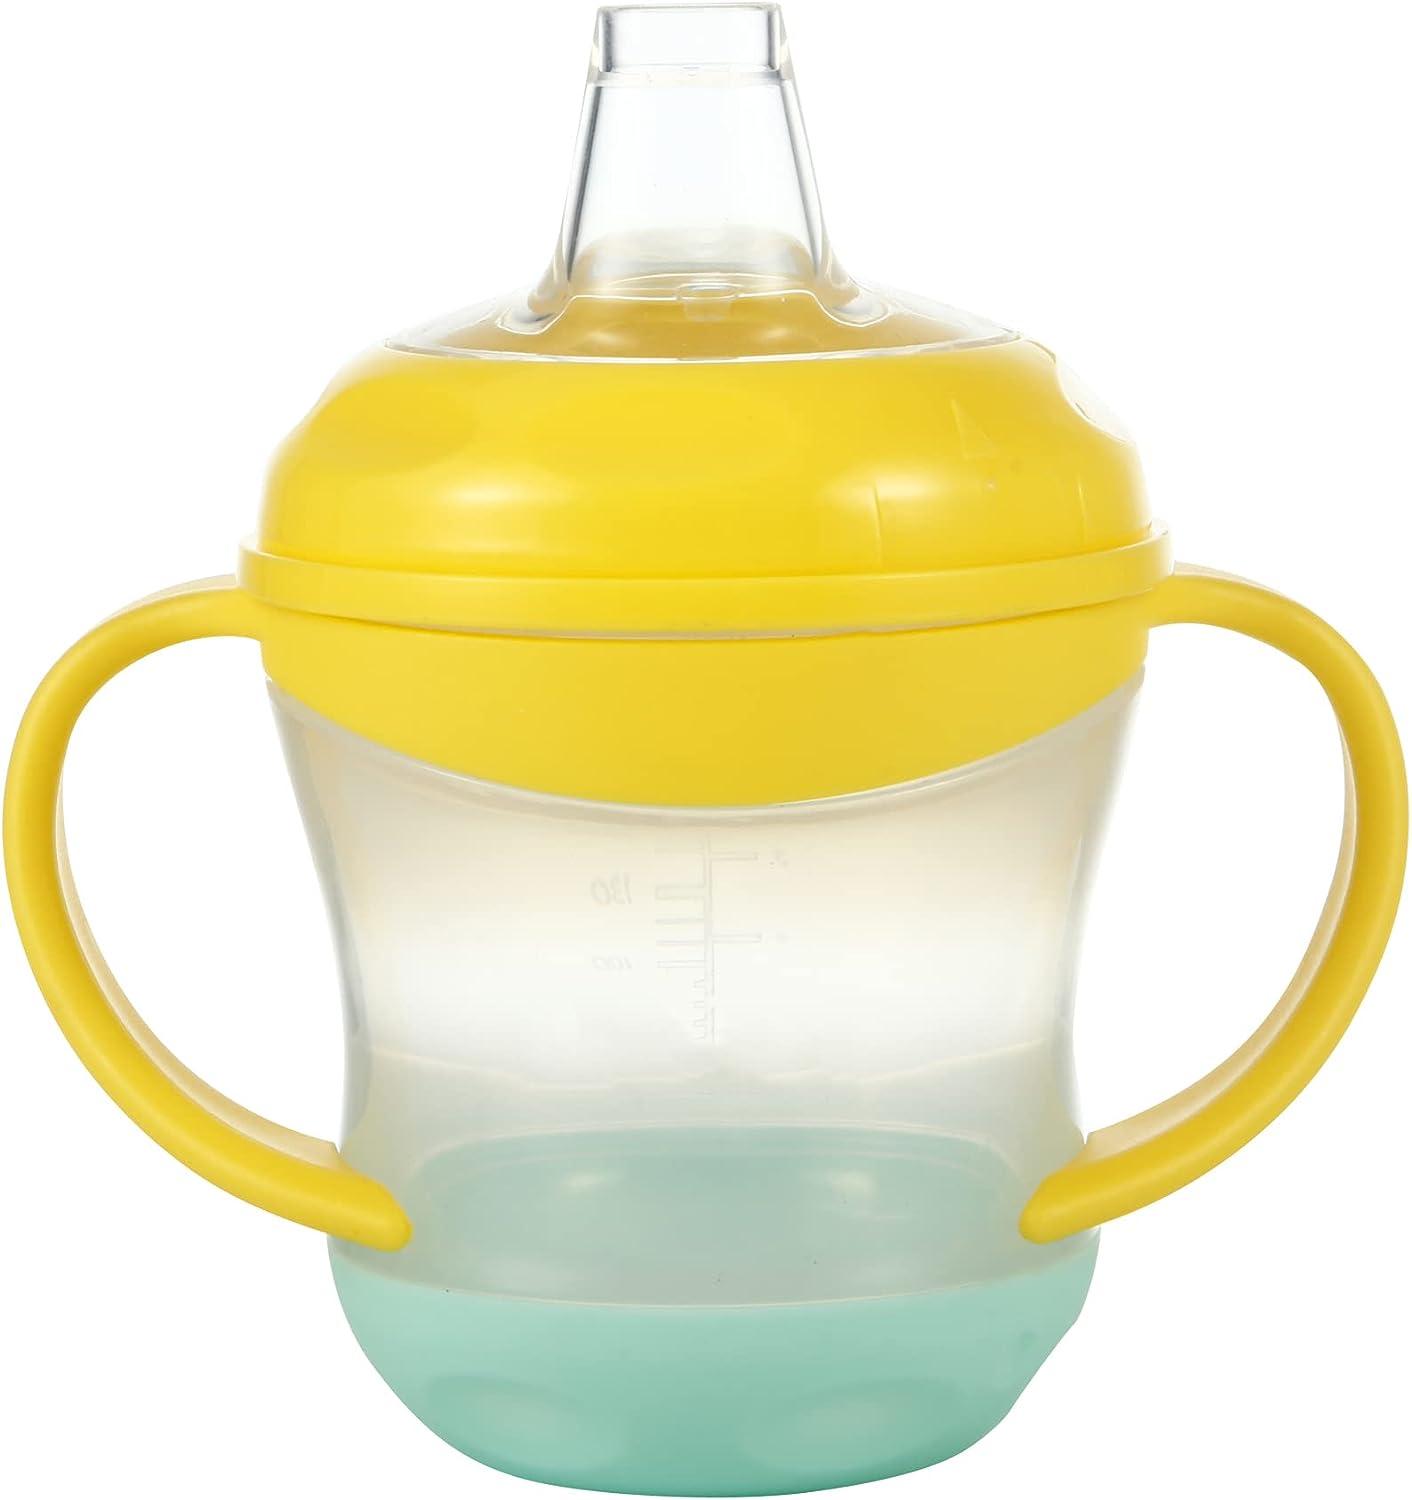 Replacement Sippy Cup Straws for your Toddler Training Cups